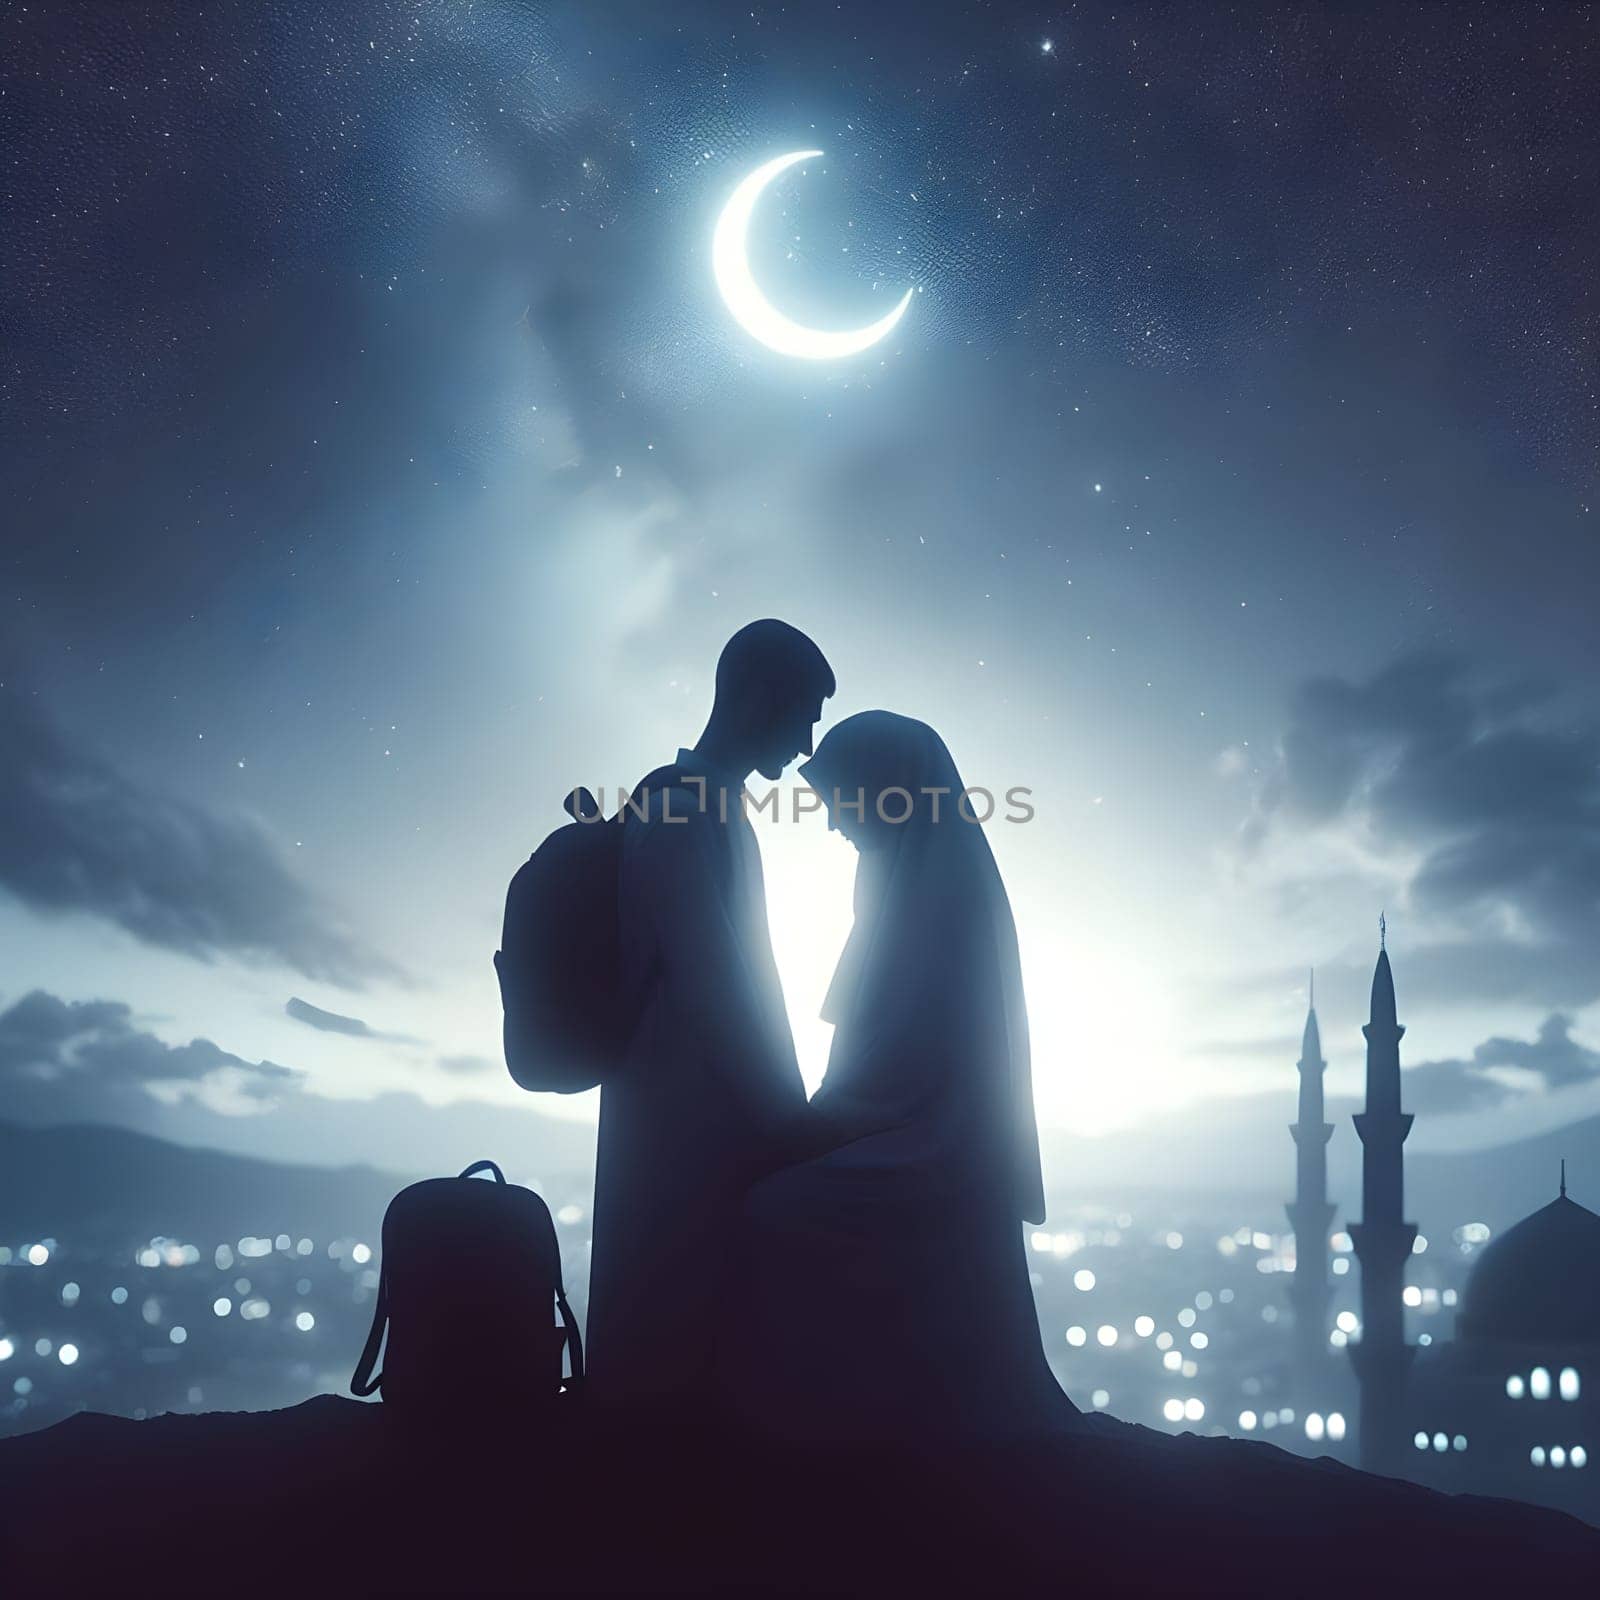 A couple silhouetted against a starry Ramadan sky, sharing a moment of reflection and gratitude under a crescent moon. Happy ramadan, ramadhan, ramazan by Designlab